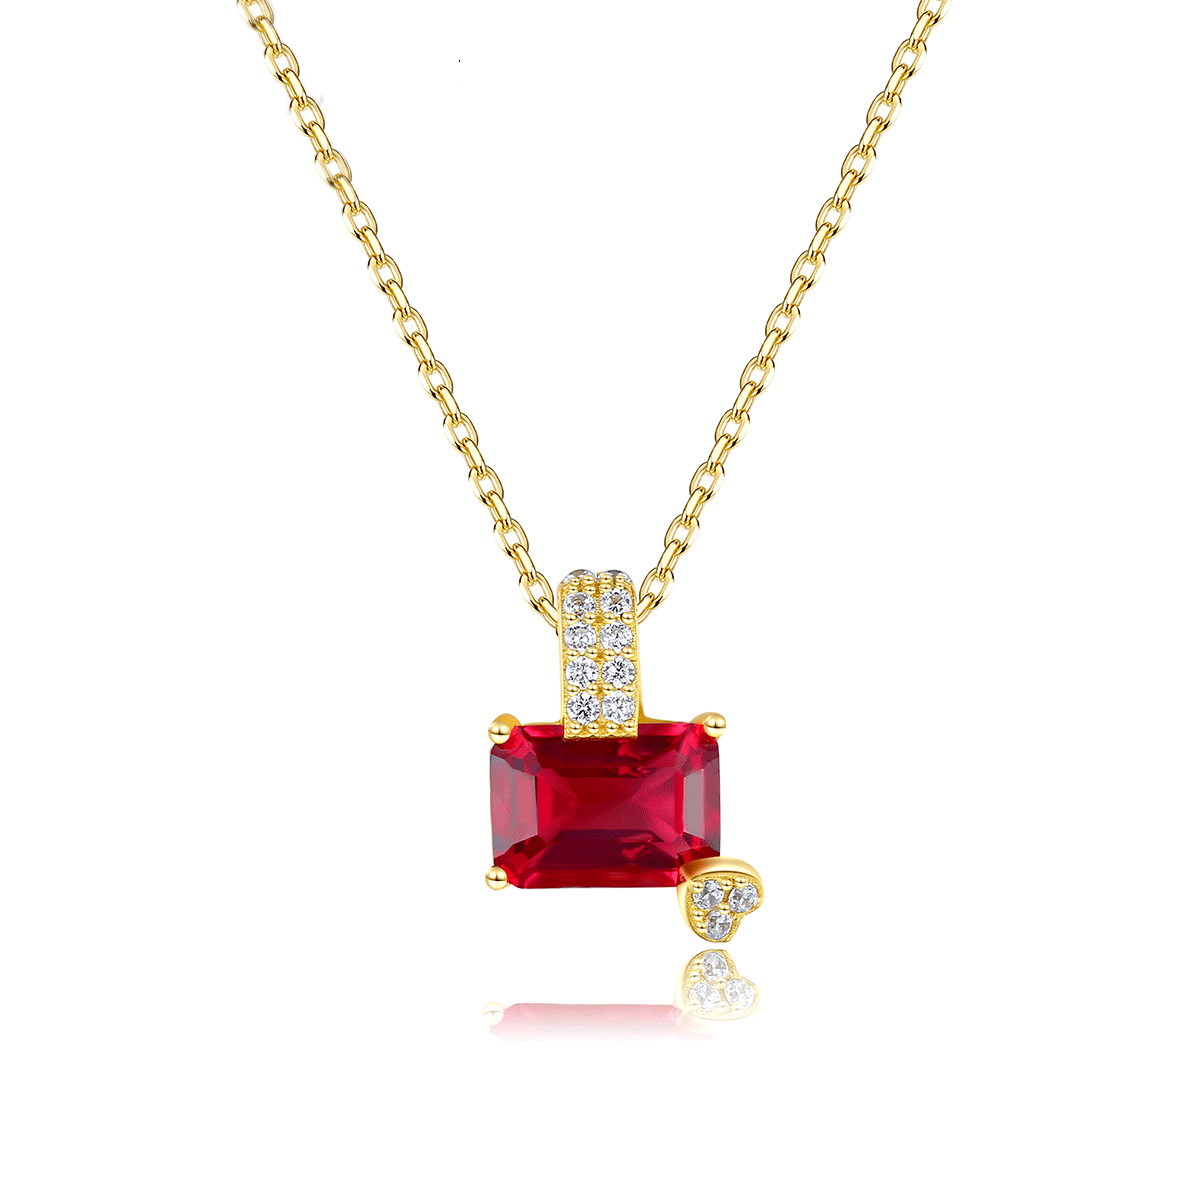 Red Ruby Pendant Sterling Silver Necklace